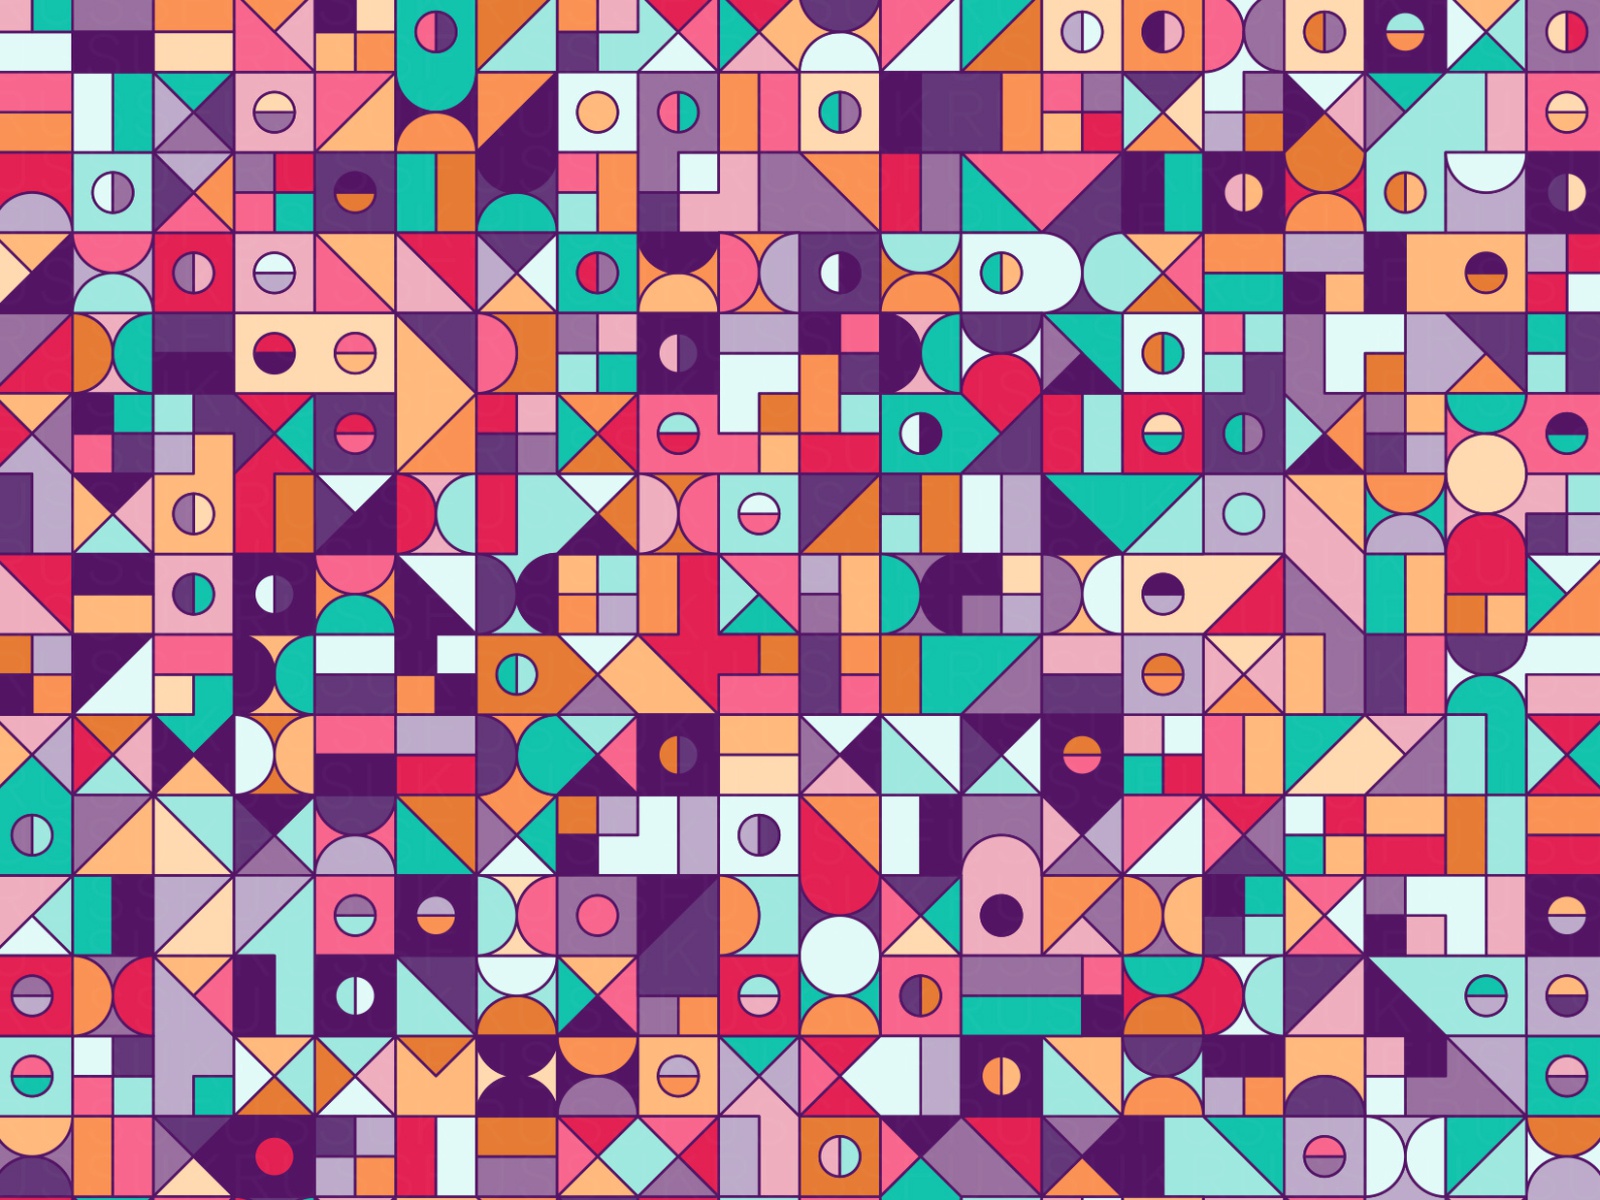 A generative grid by Russ Parker